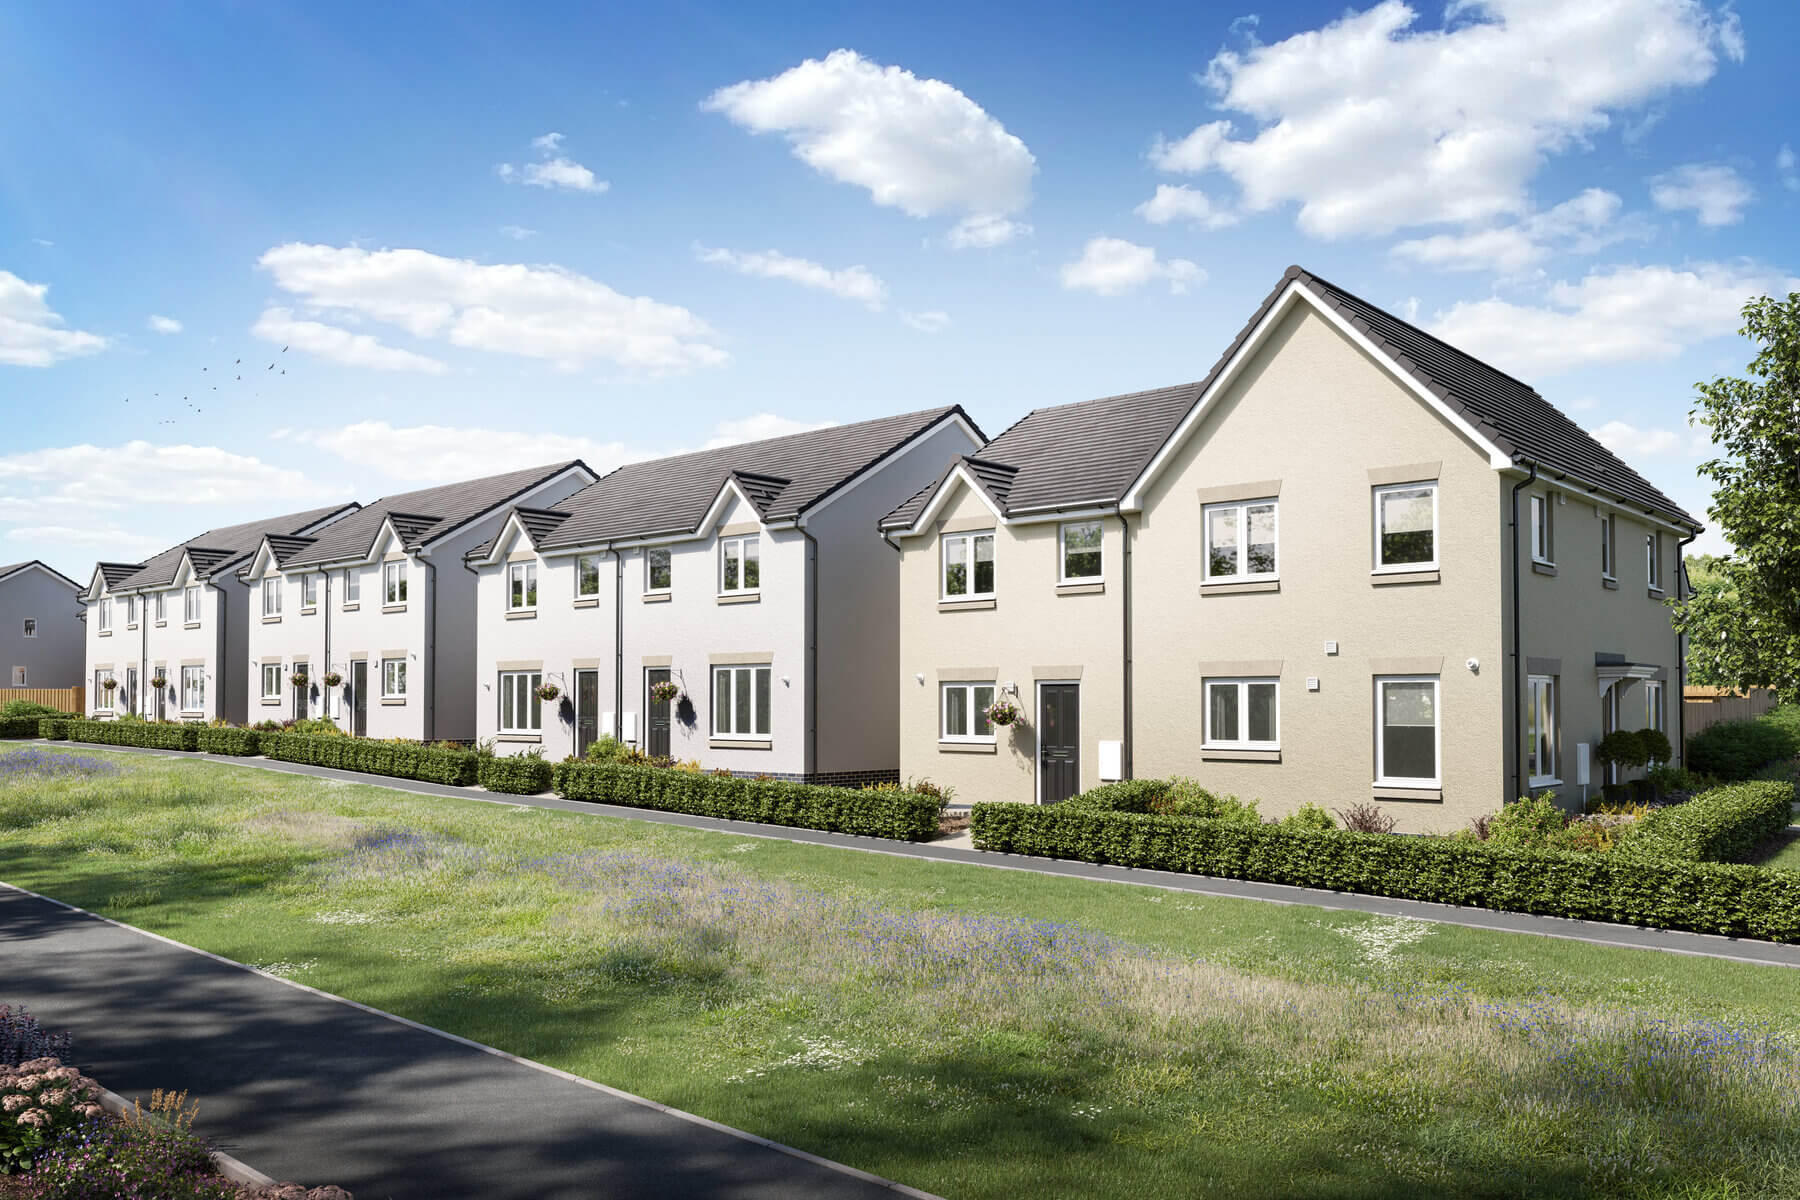 Taylor Wimpey to deliver affordable new homes in Winchburgh for Home in Scotland